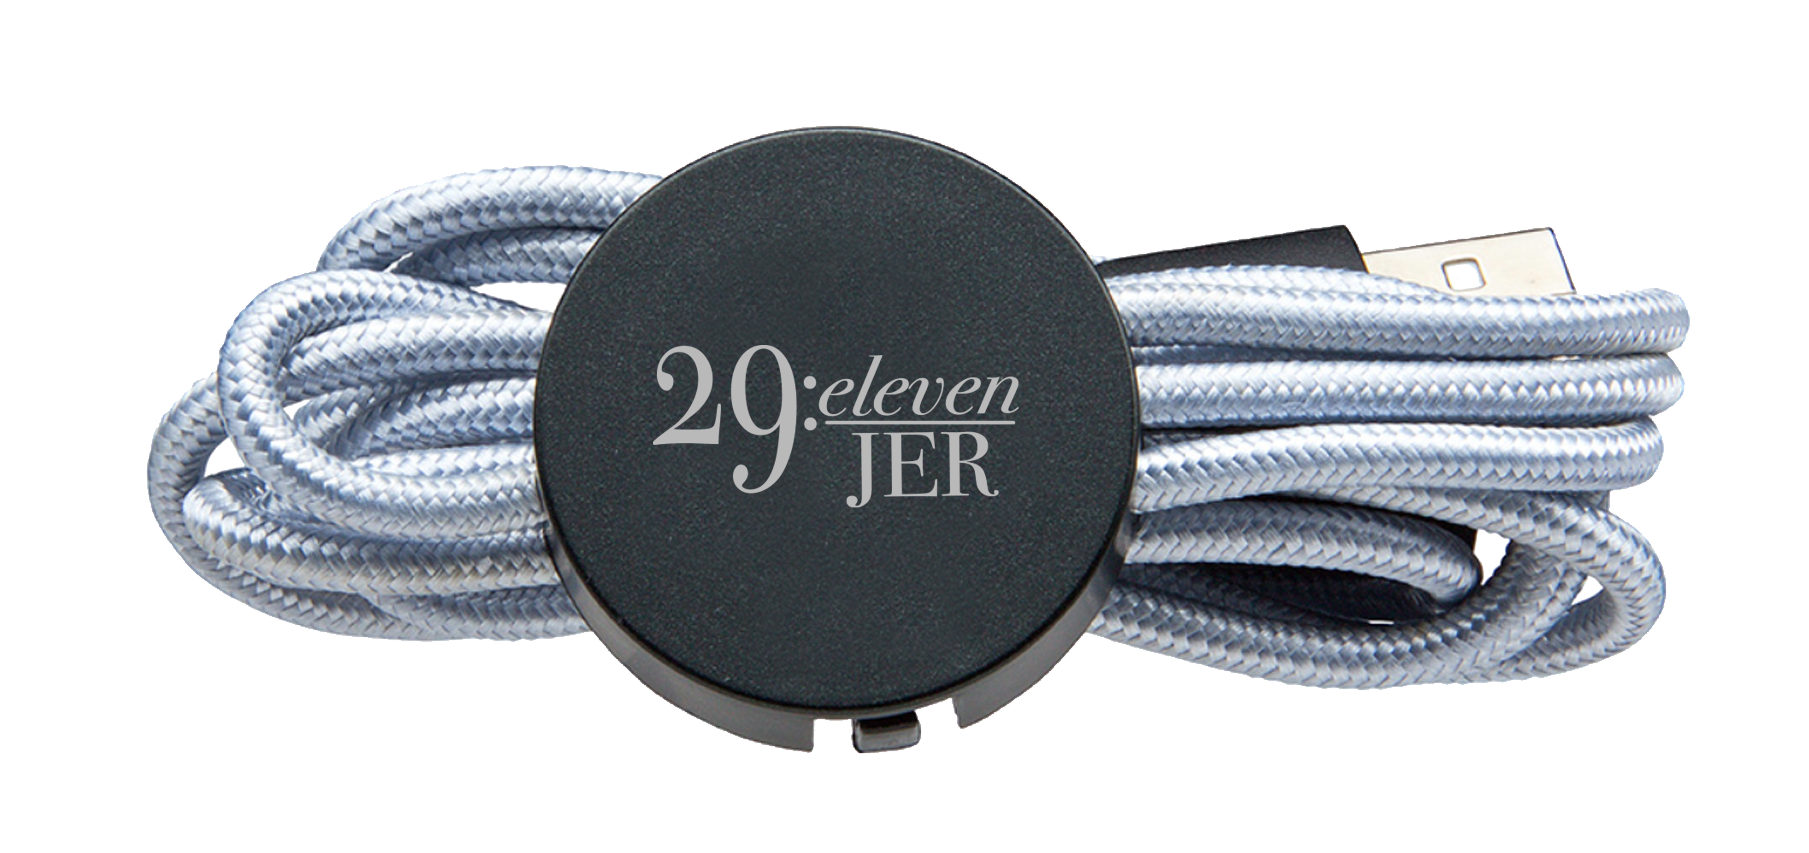 3-in-1 charging cable with Jeremiah 29:11 Scripture reference